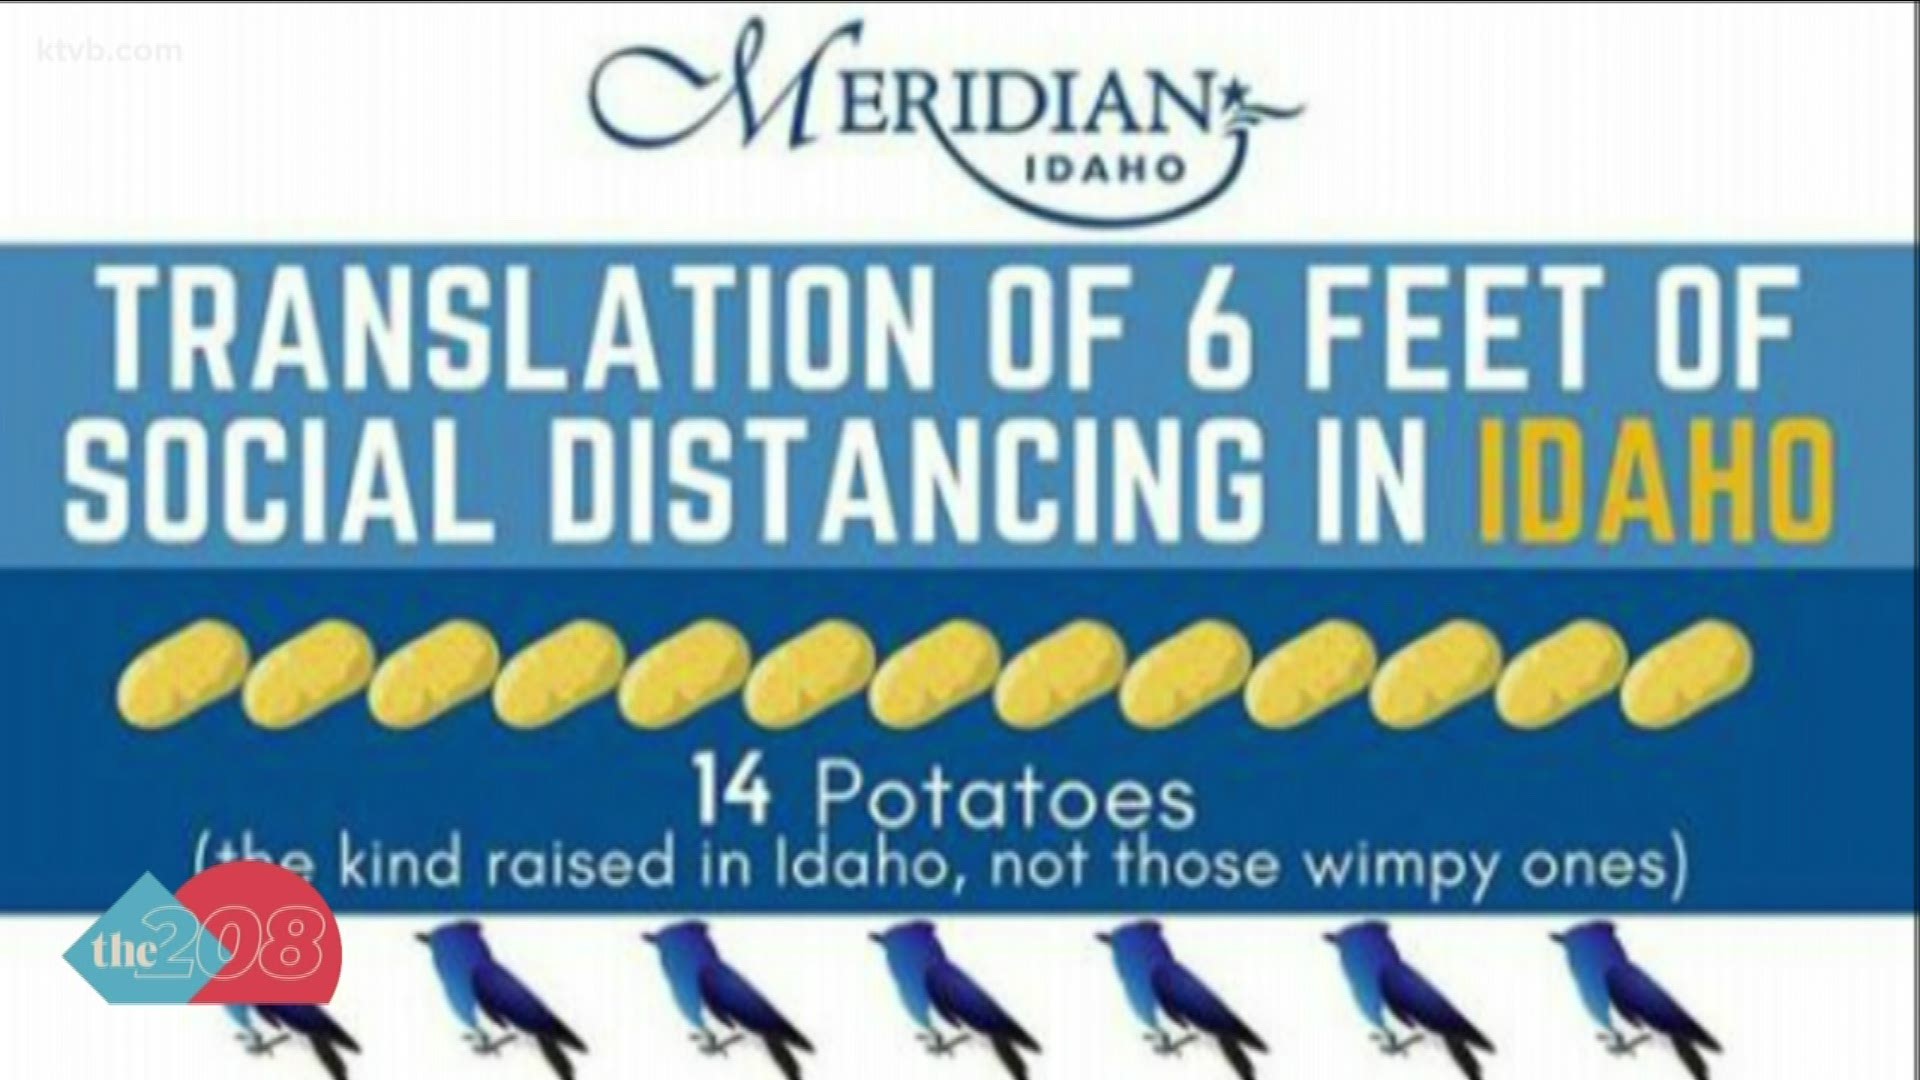 The city of Meridian created a chart that shows how far apart six feet is measured in potatoes, birds, fish and huckleberries.